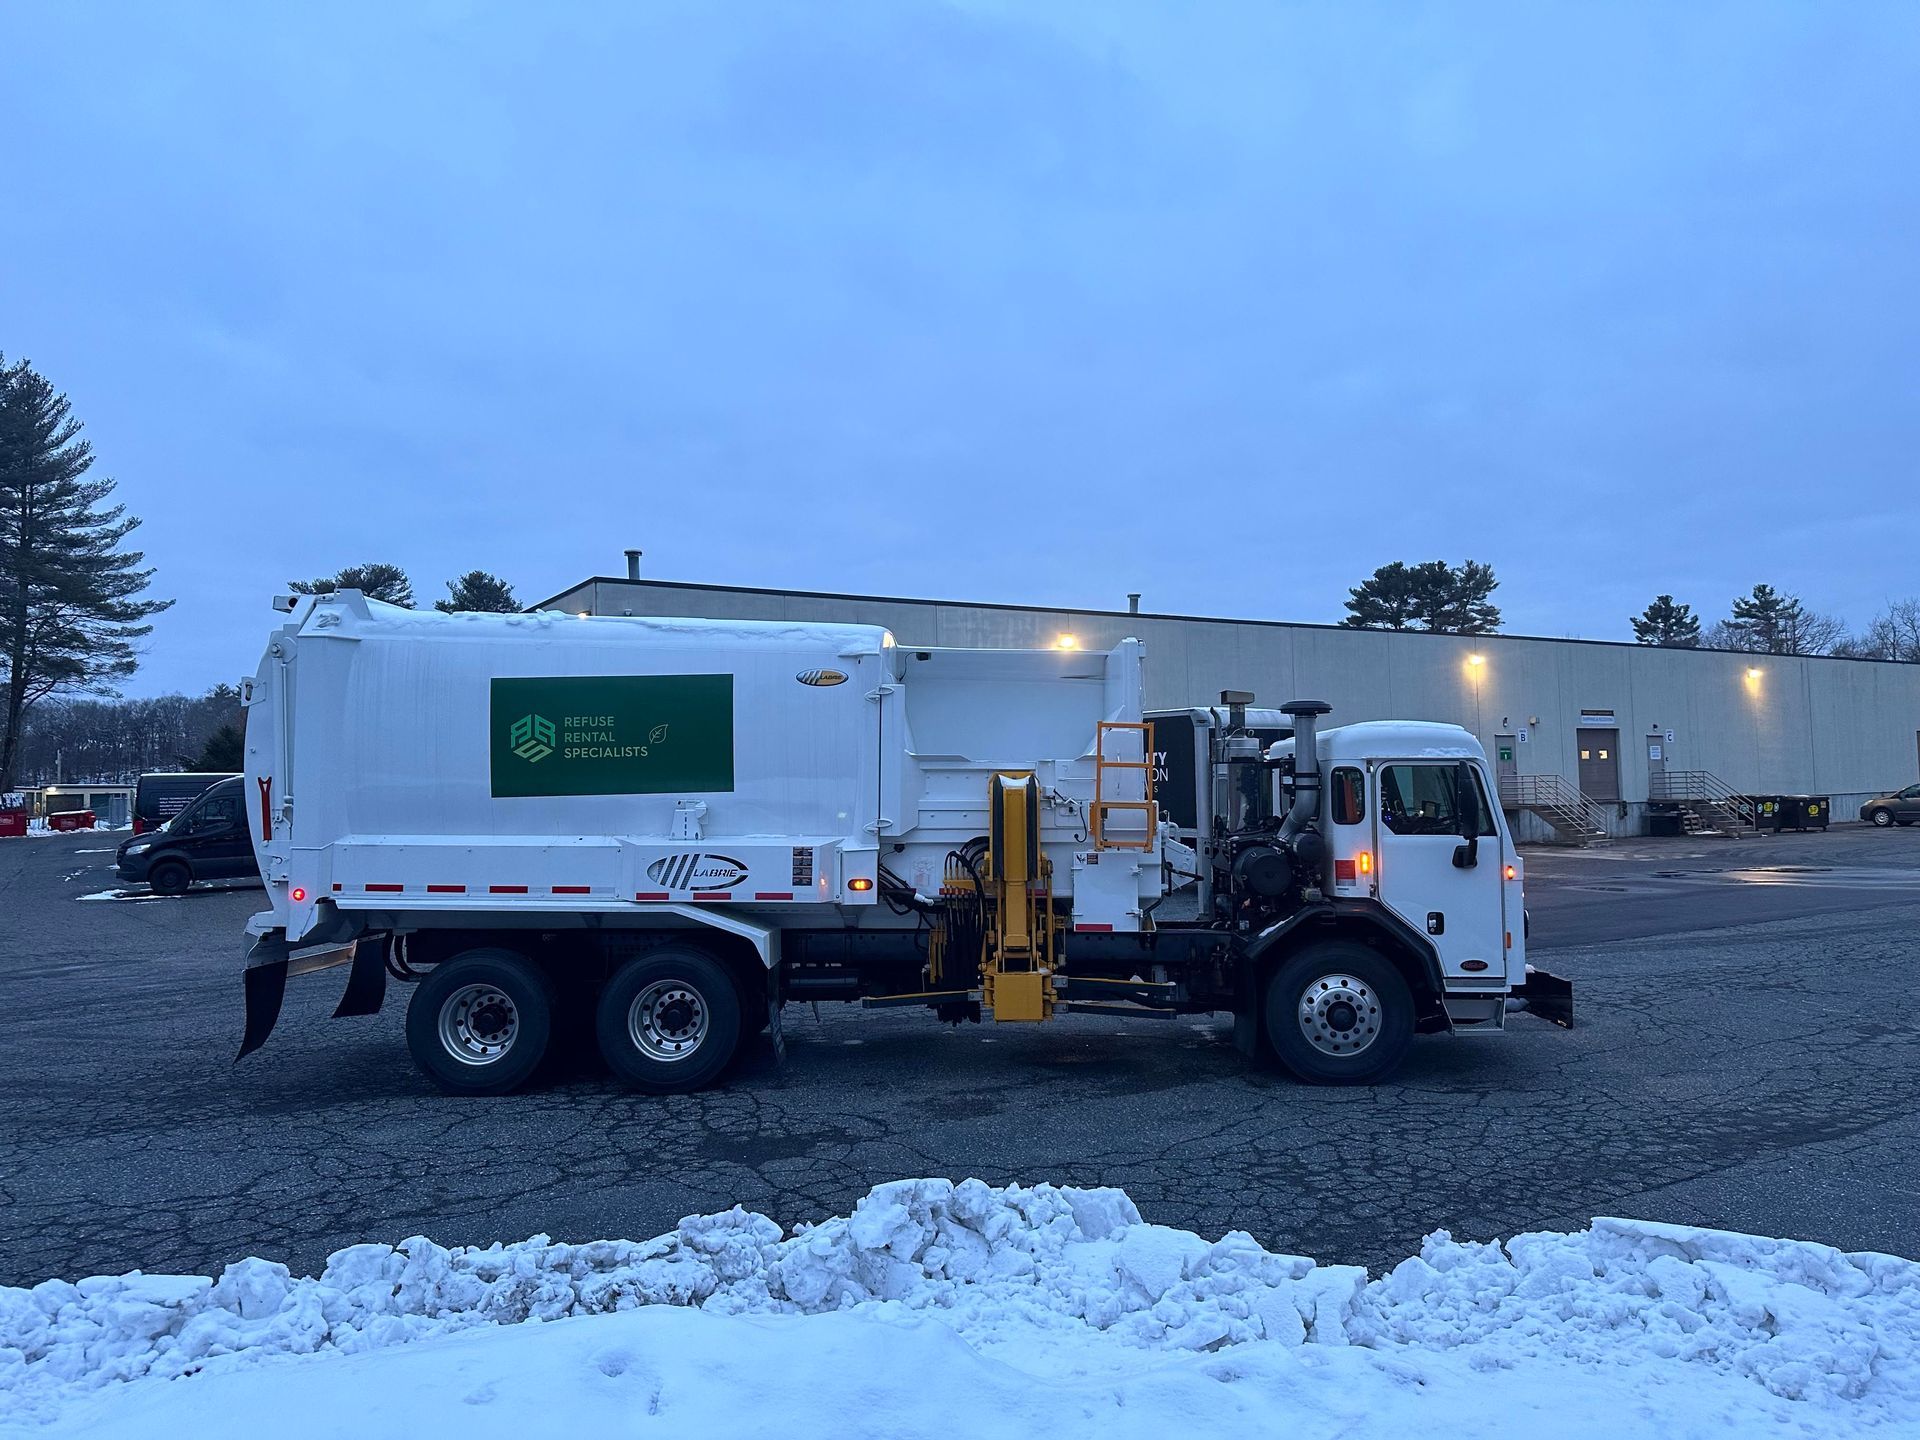 A white garbage truck is parked in a snowy parking lot.